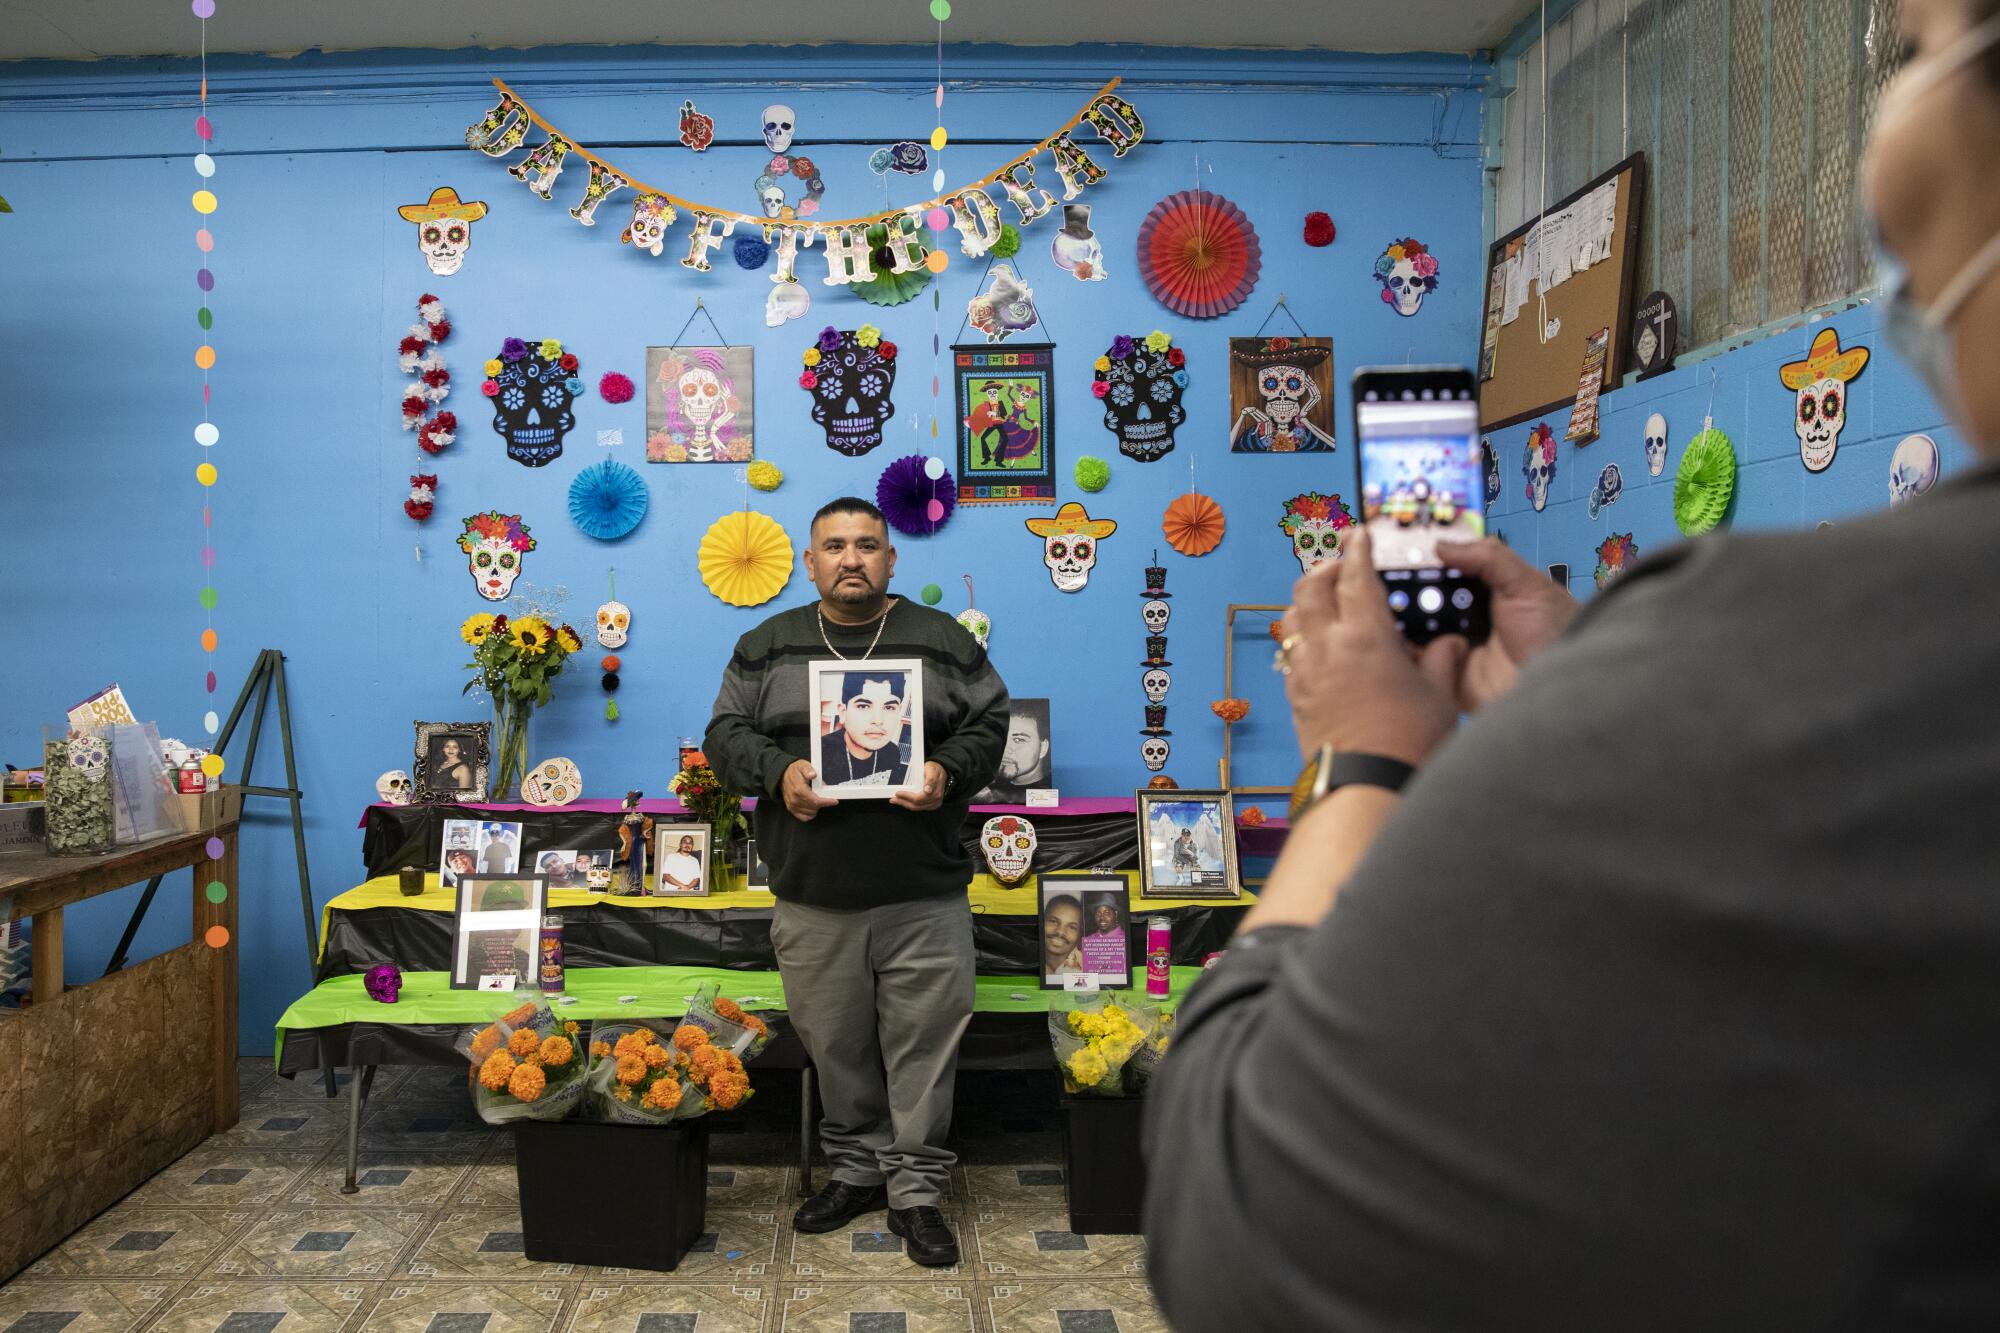 Carlos Munoz holds a picture of his late son in front of a Day of the Dead altar as his wife takes a photograph.